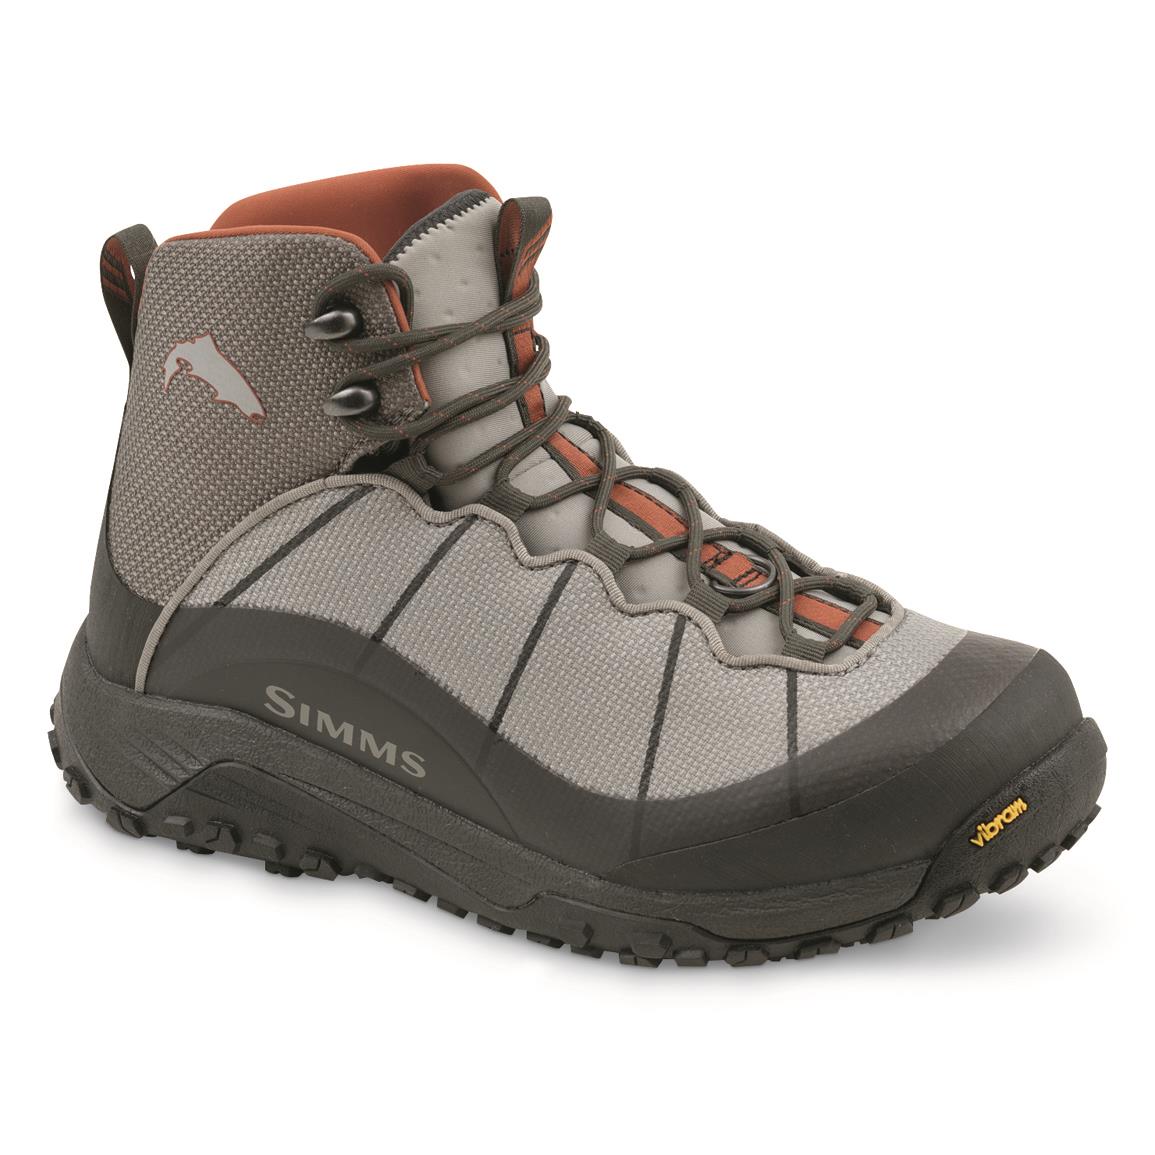 Simms Women's Flyweight Wading Boots, Rubber Sole, Cinder